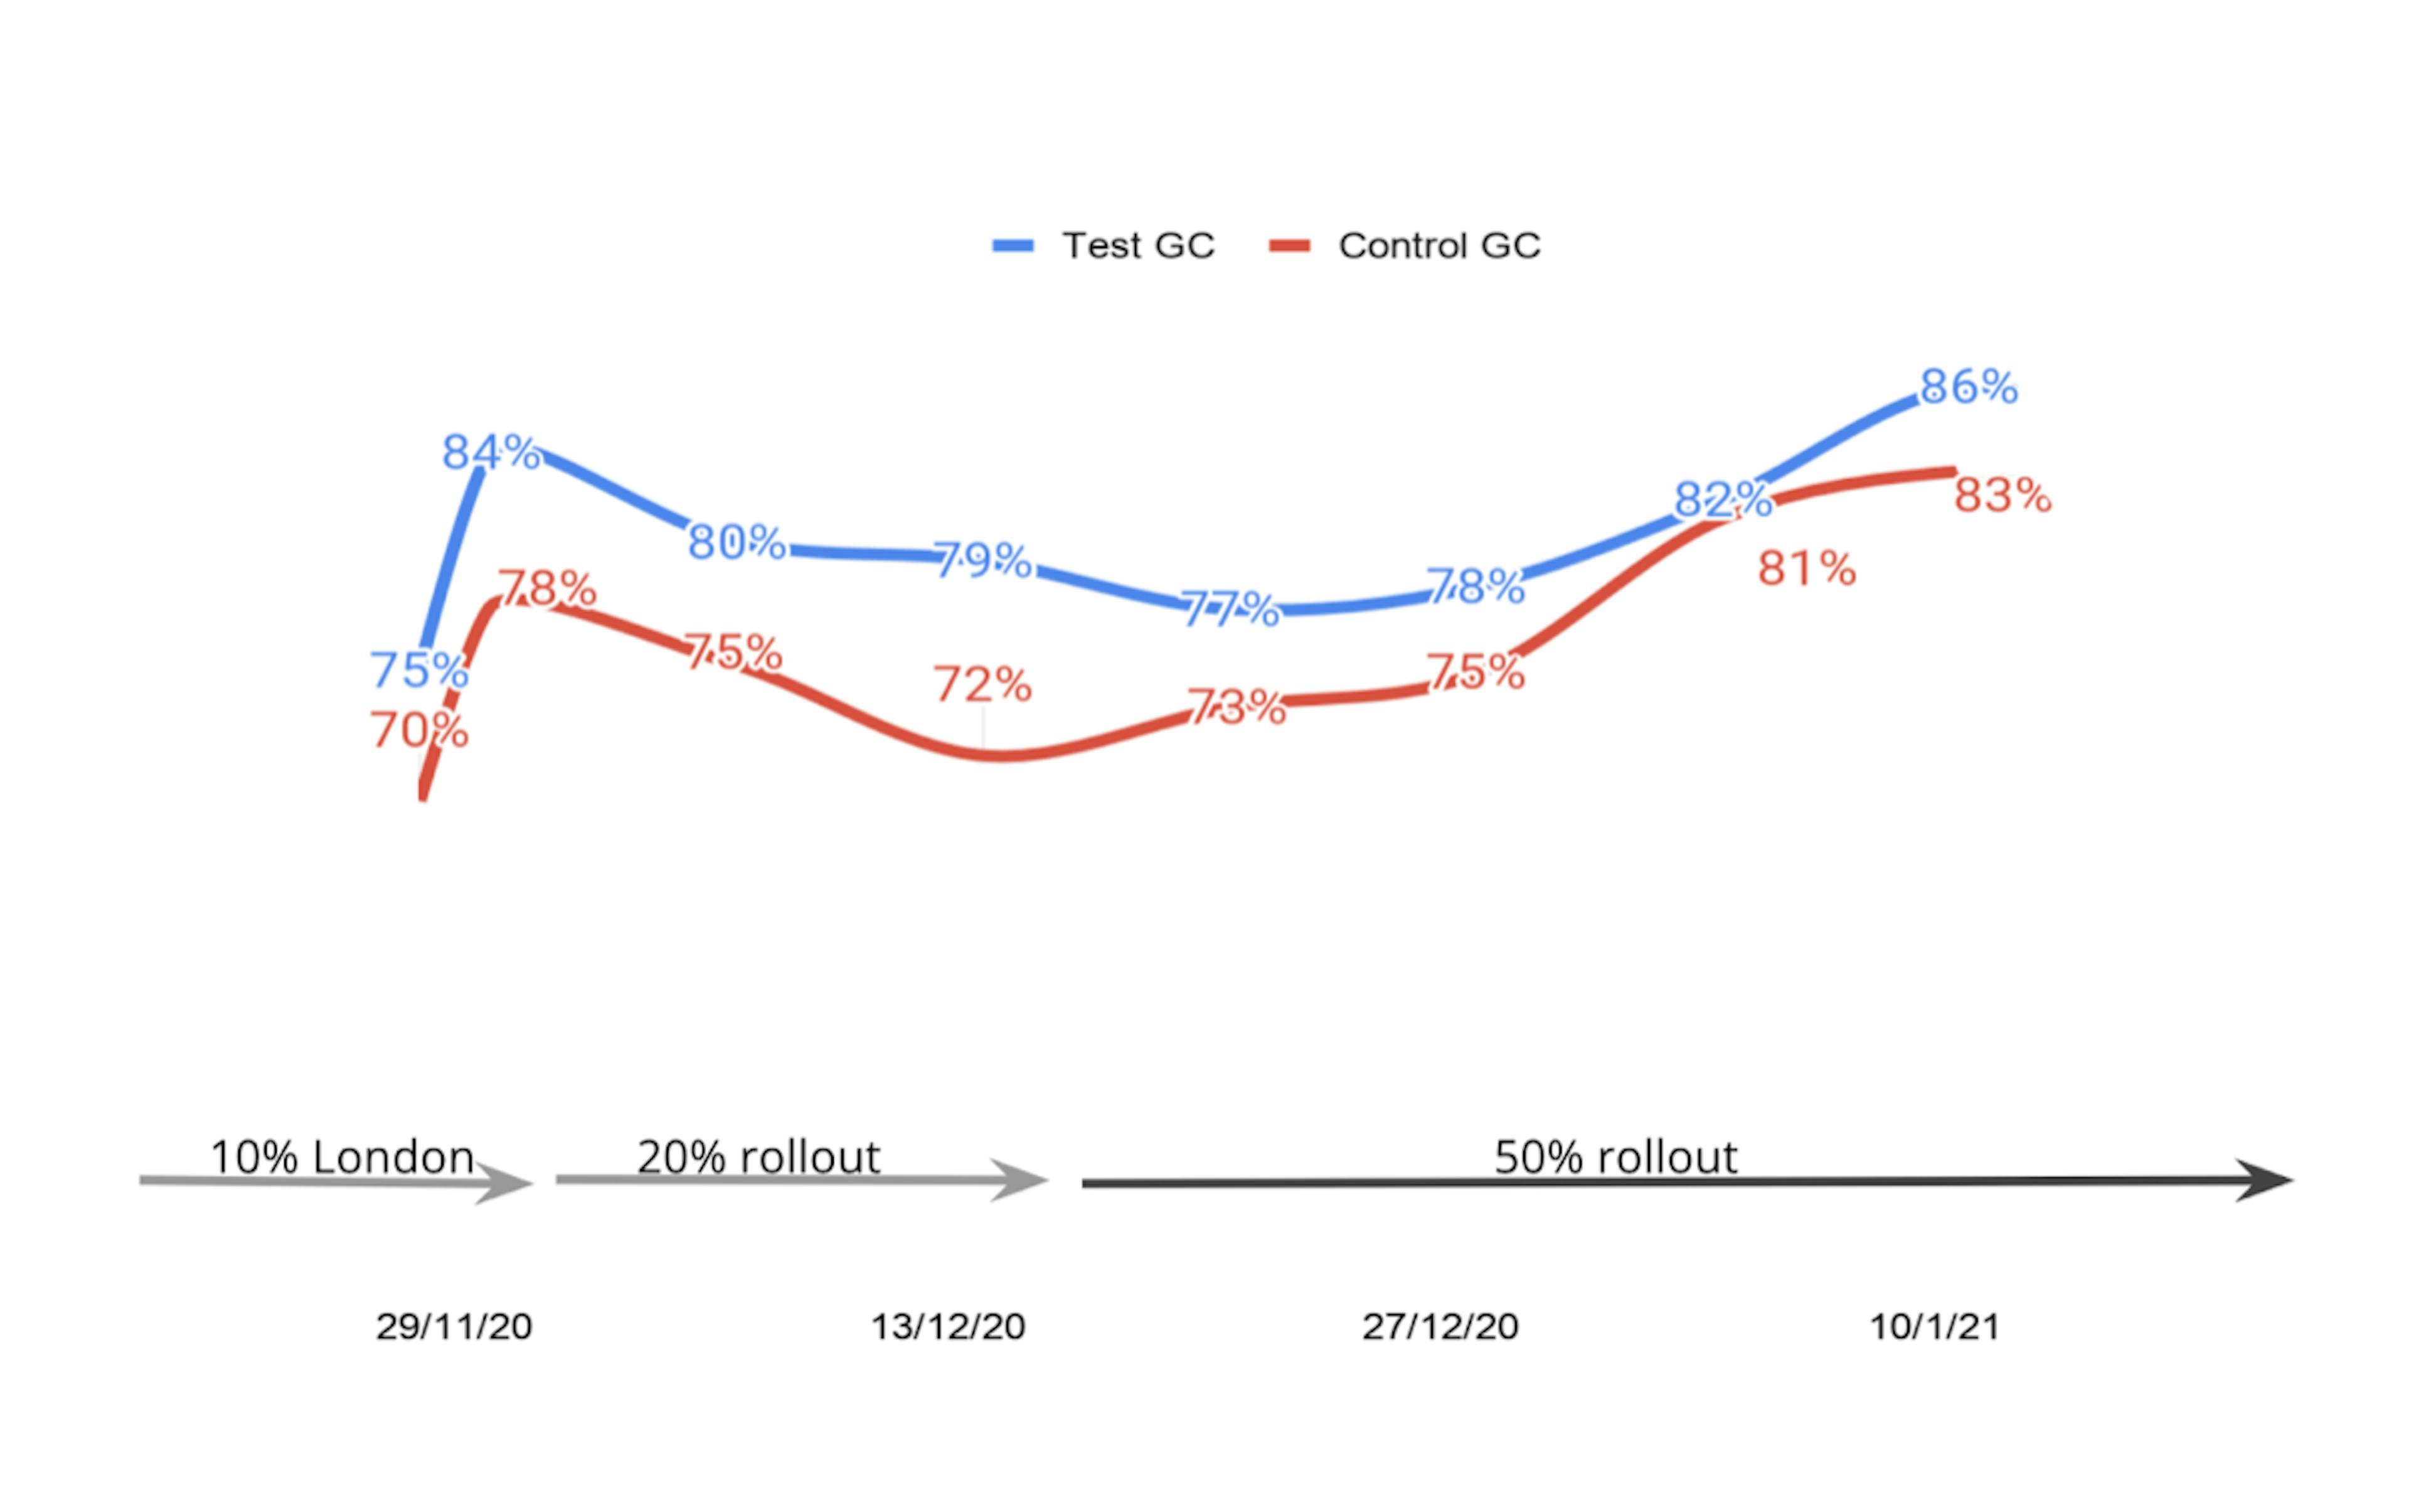 10%/20%/50% –> Increase in the percentage of ML model implementation instead of manual driver search configuration. The blue line illustrates the performance of the GCR (Gross Completion Rate) metric using the ML model. Contrasted against the GCR on the red line – manual driver search configuration.